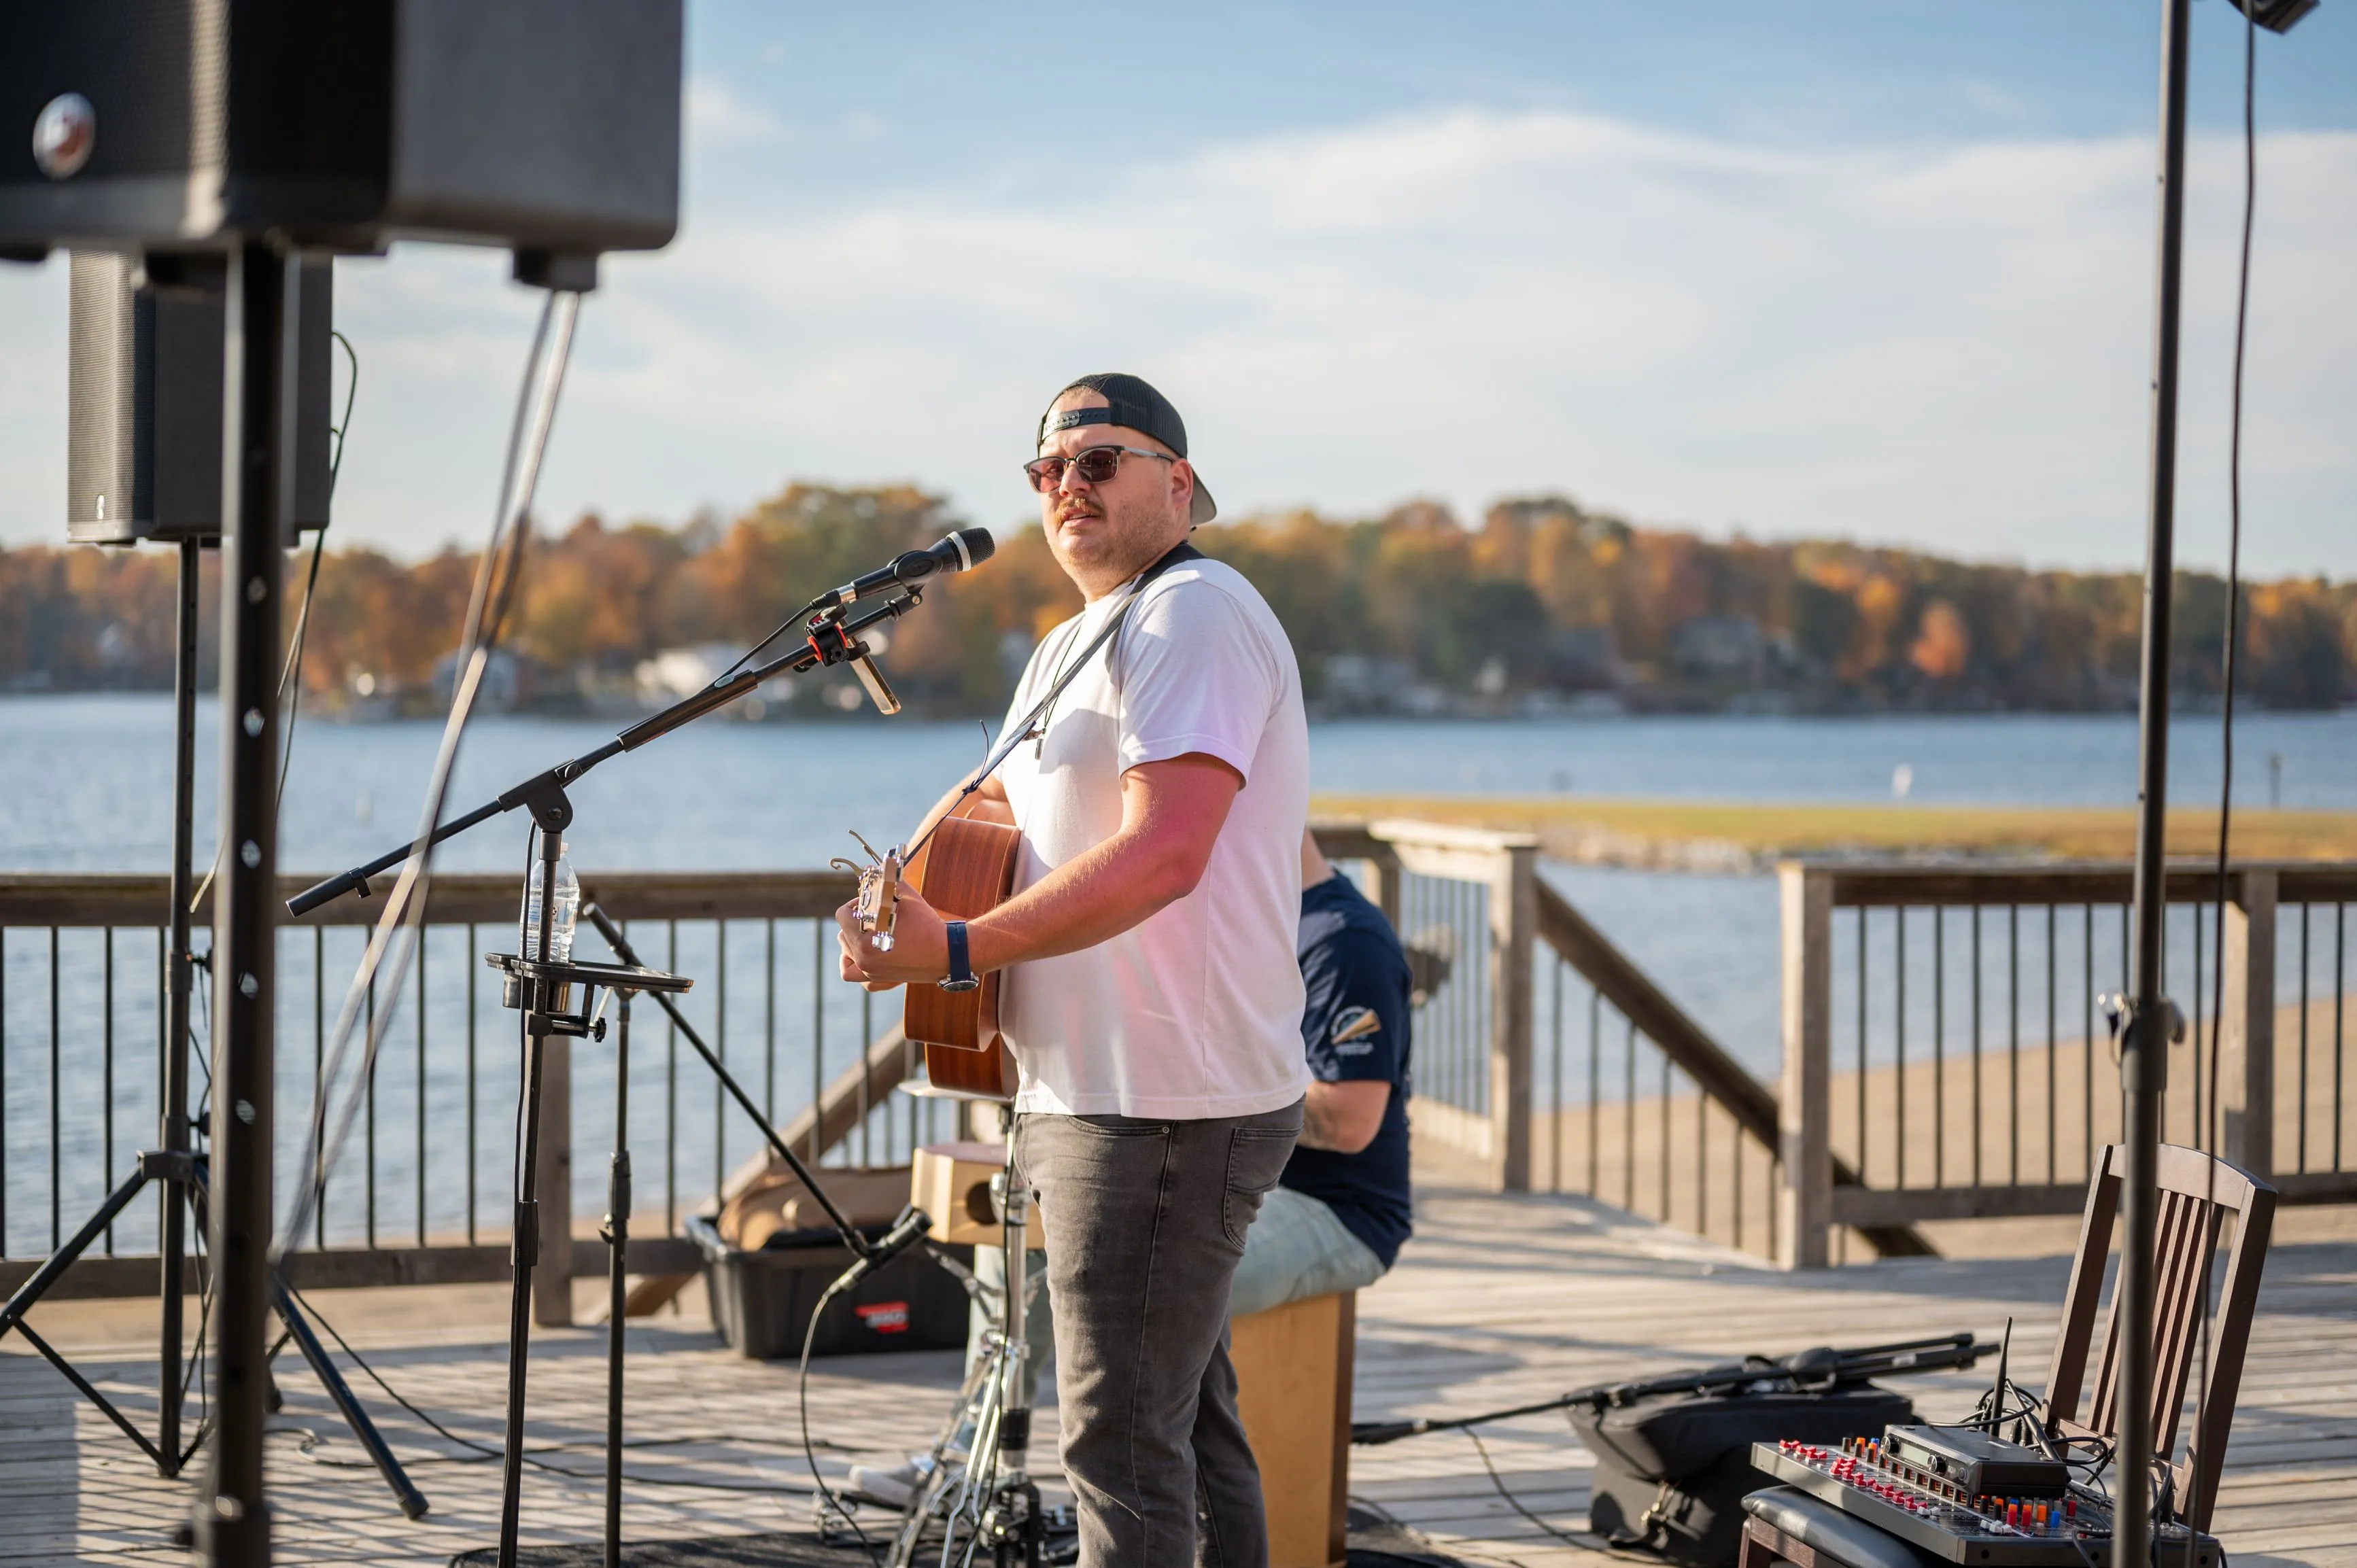 Musician playing an acoustic guitar on a lakeside stage with microphone and speakers.